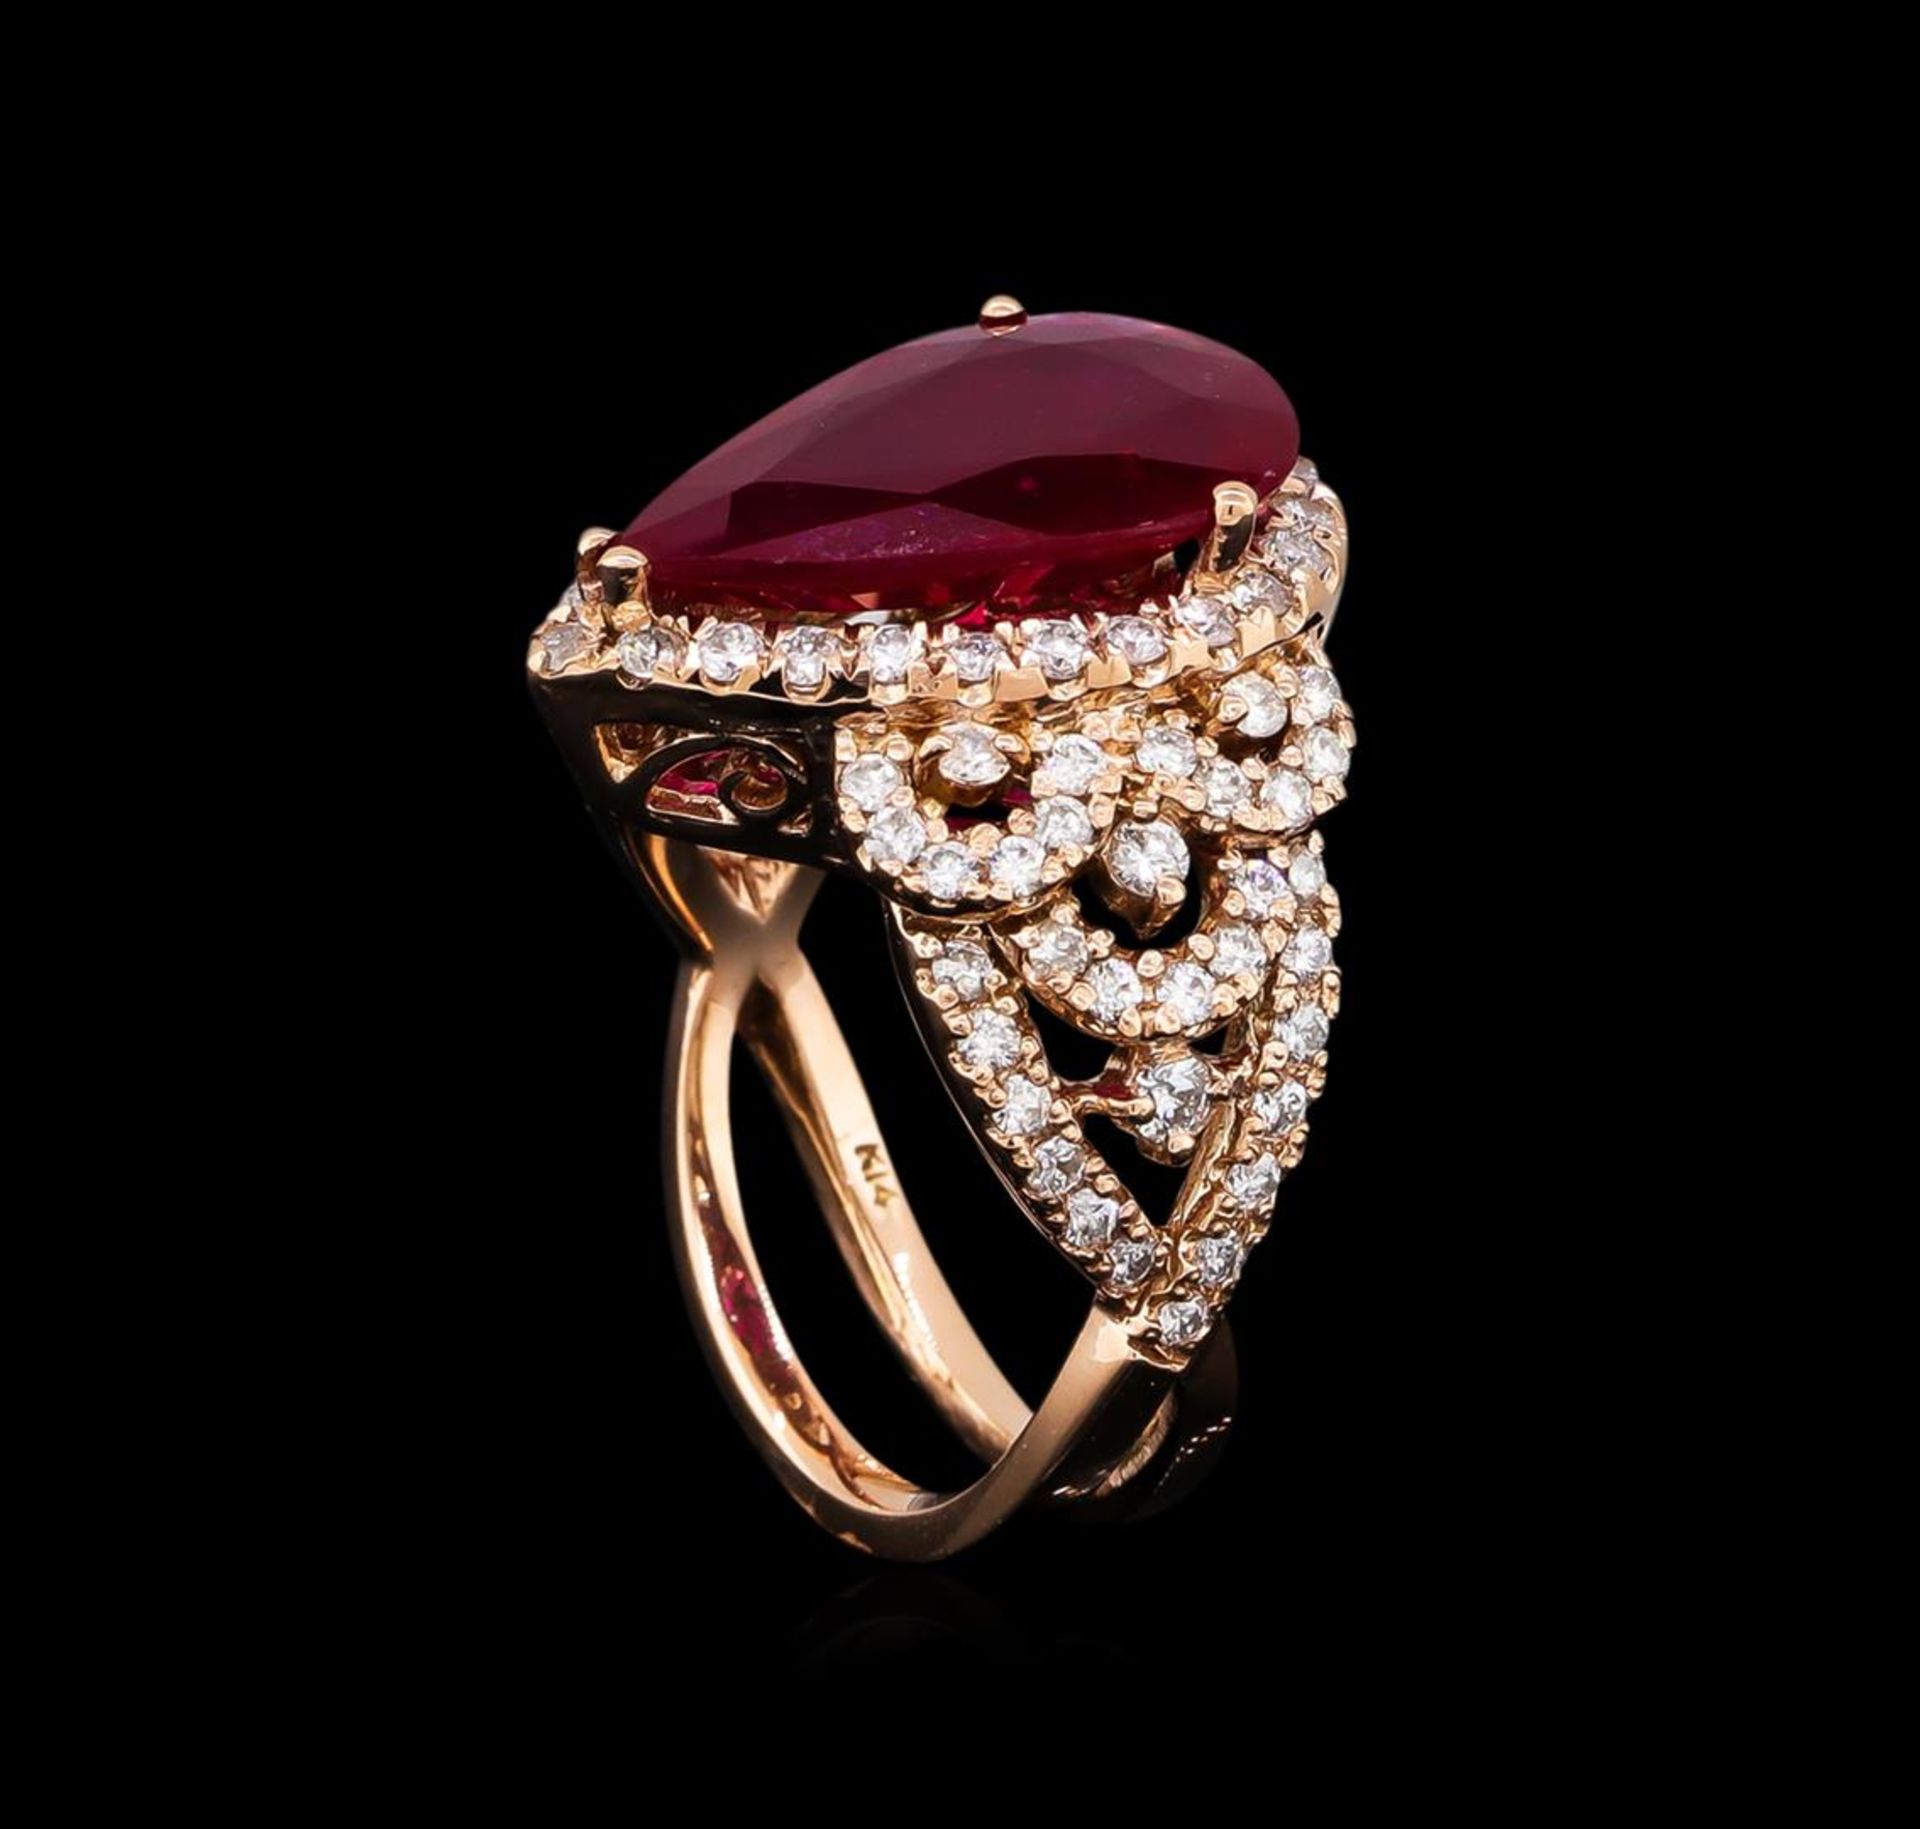 5.35ct Ruby and Diamond Ring - 14KT Rose Gold - Image 4 of 6